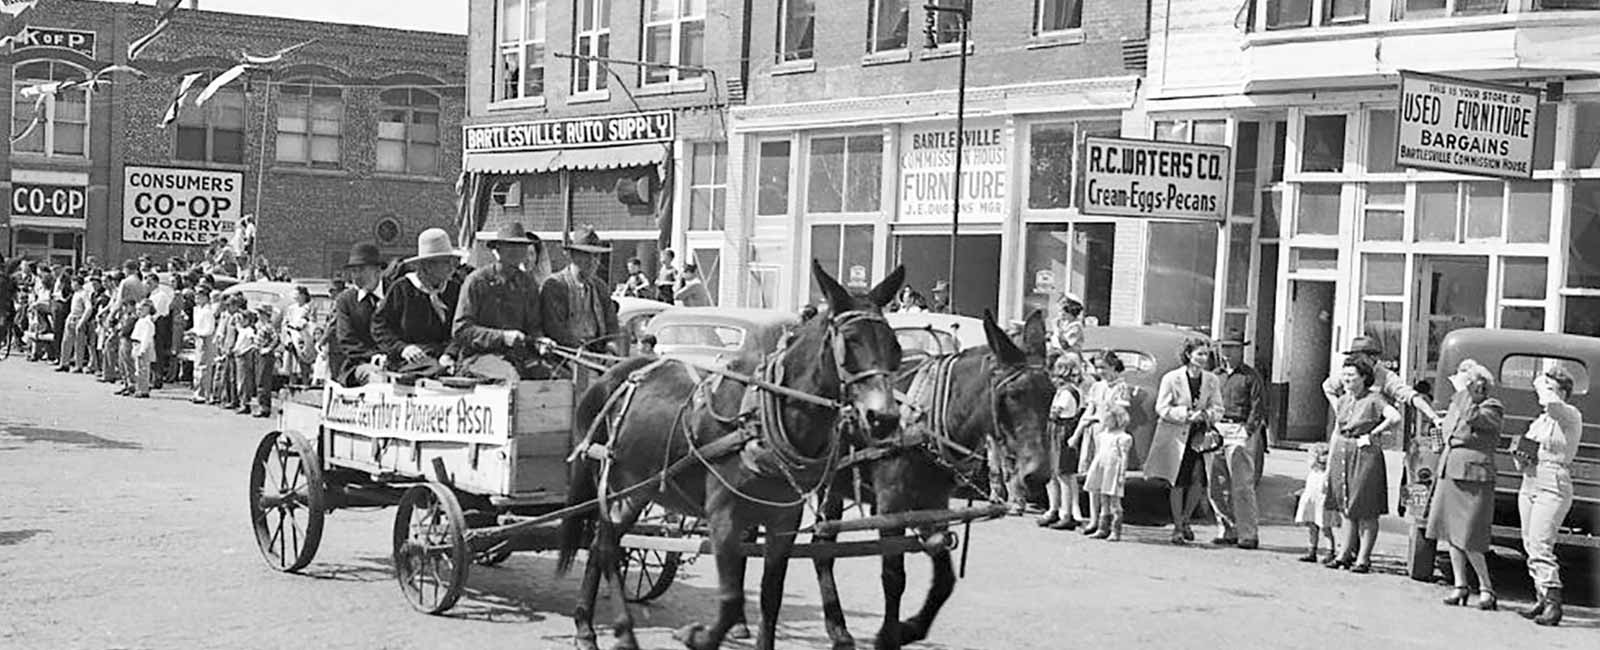 Black and white photo from mid-nineteenth century of parade in Bartlesville